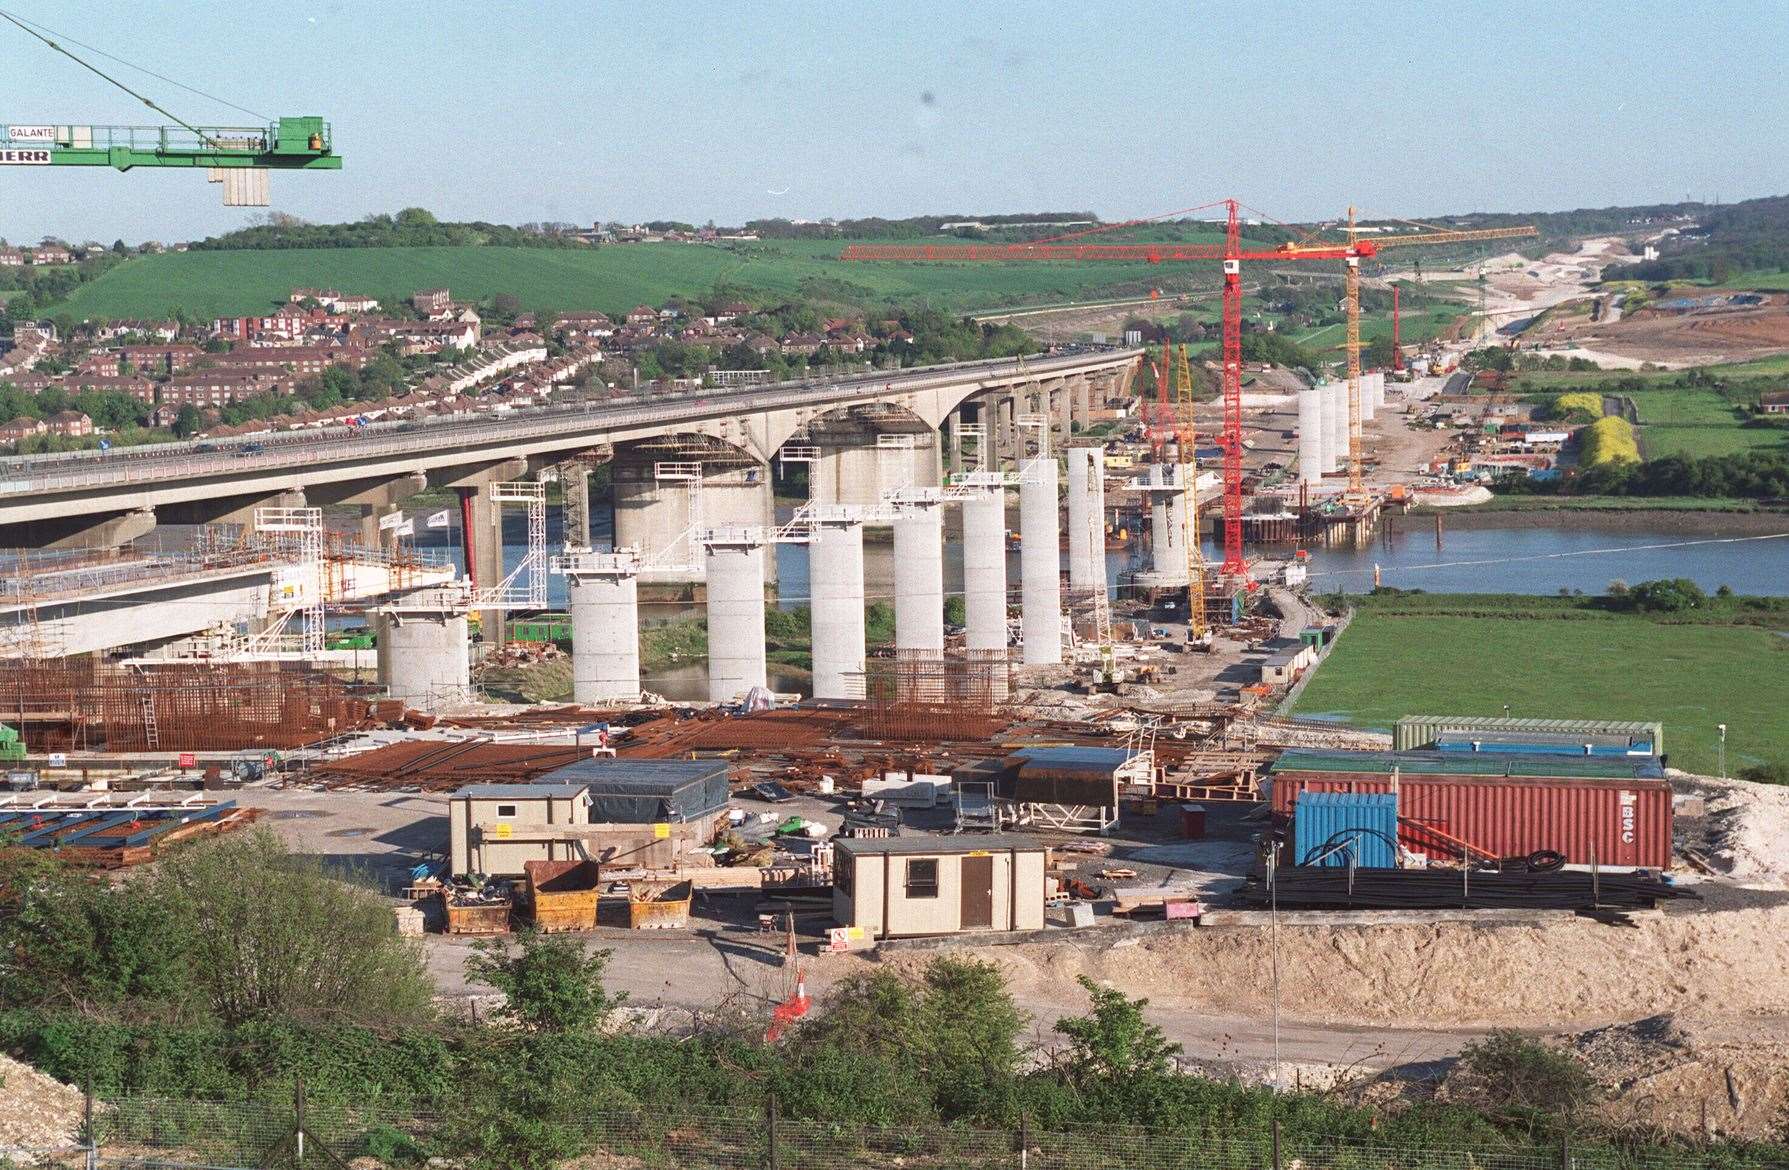 Construction of the HS1 railway bridge over the River Medway